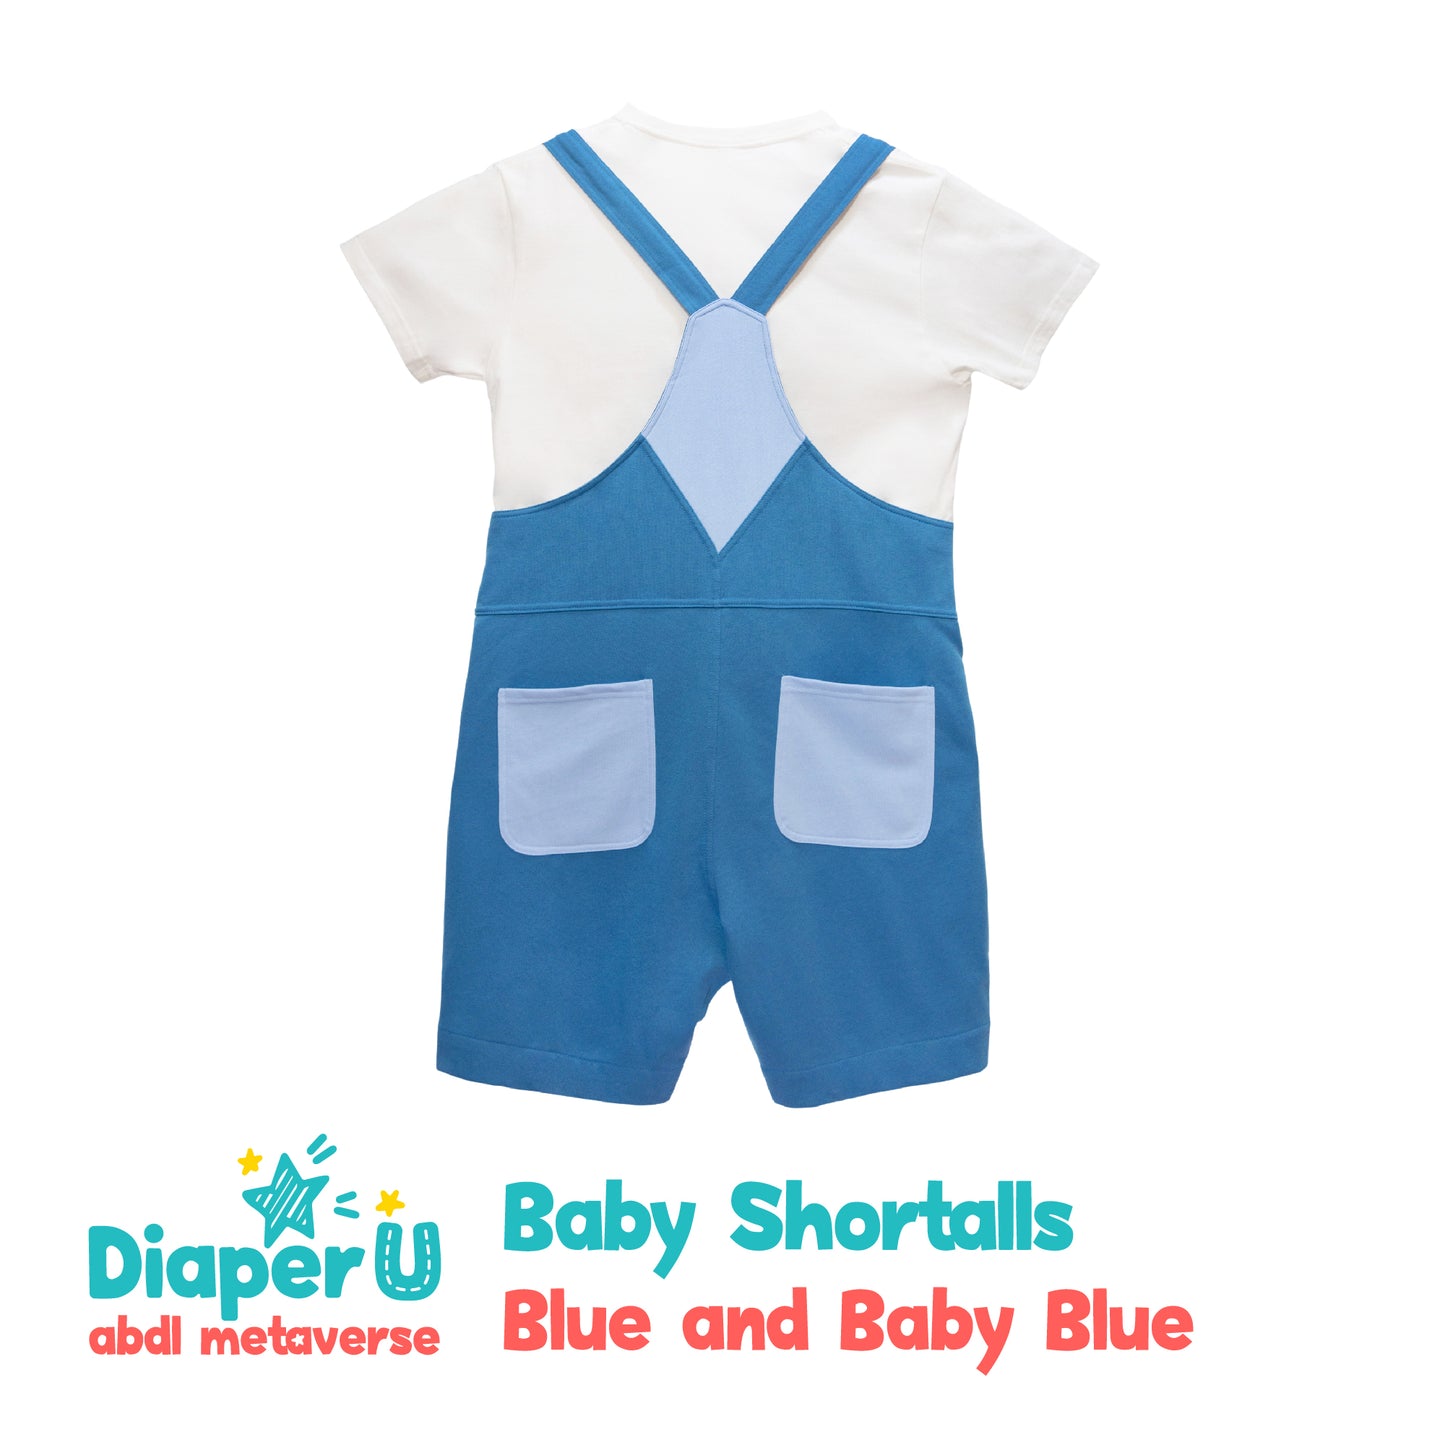 Baby Shortalls - Blue and Baby Blue (Unisex)